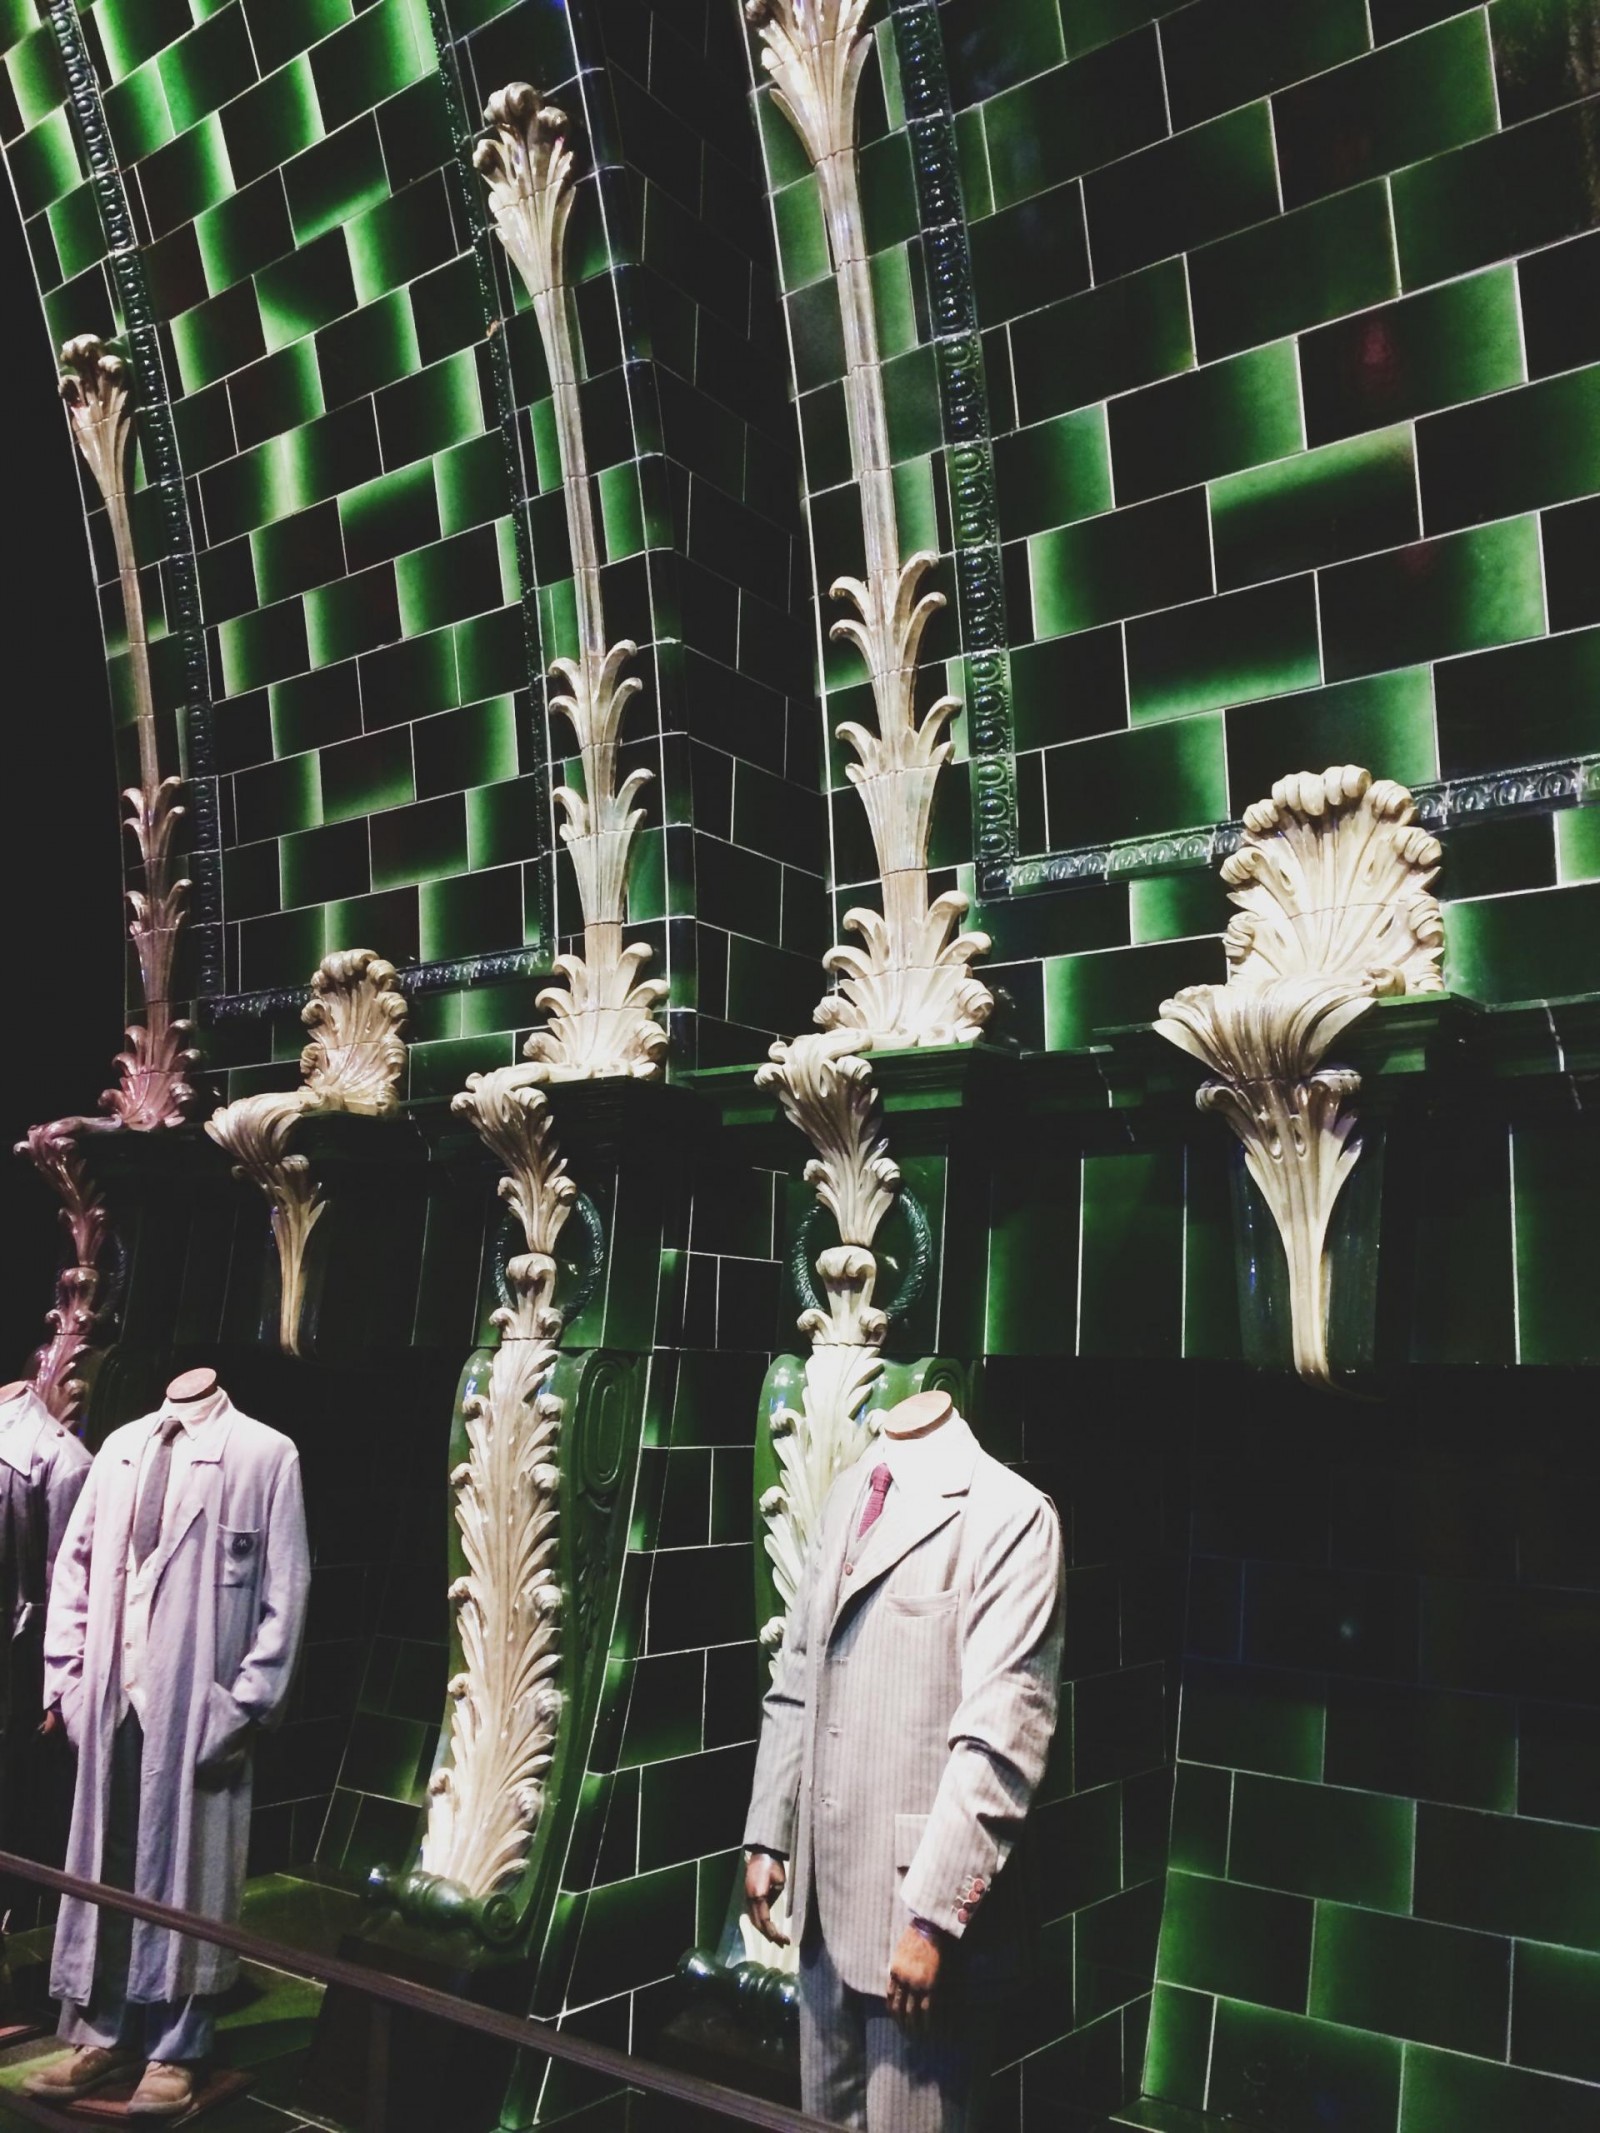 the ministry of magic